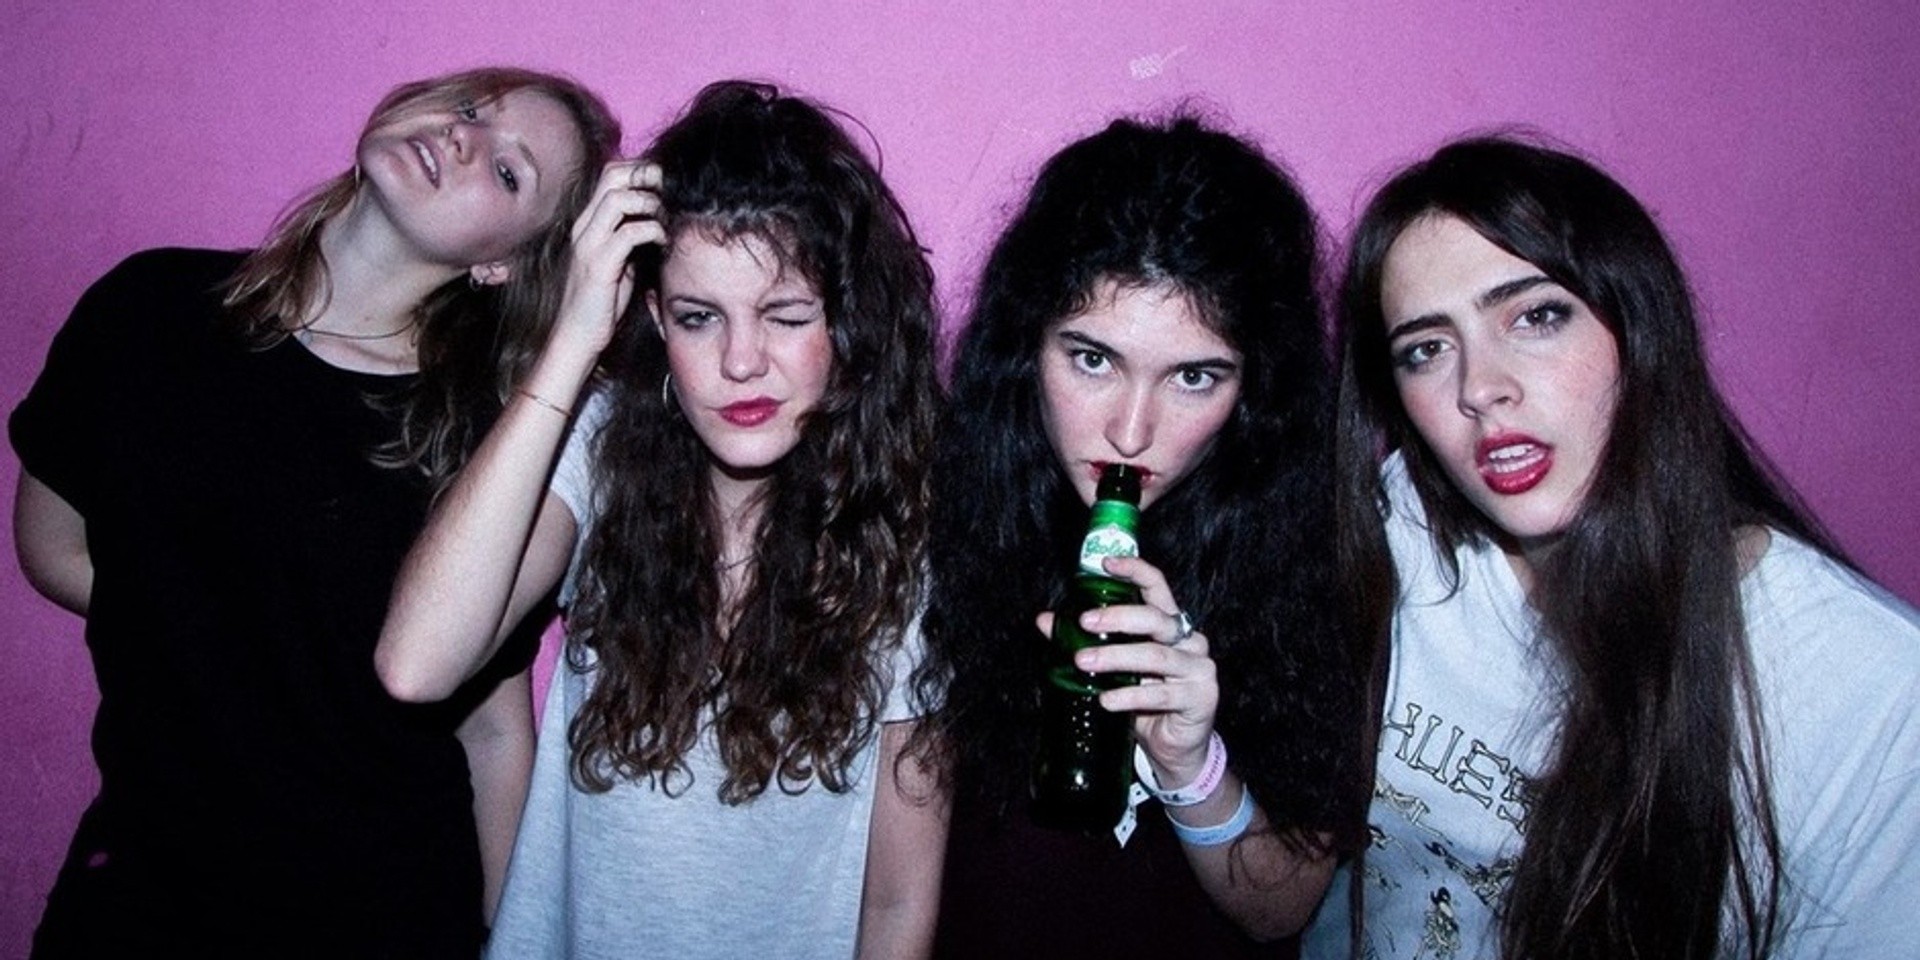 WATCH: Hinds reflect on their first major world tour, perform 'Fat Calmed Kiddos' in Singapore